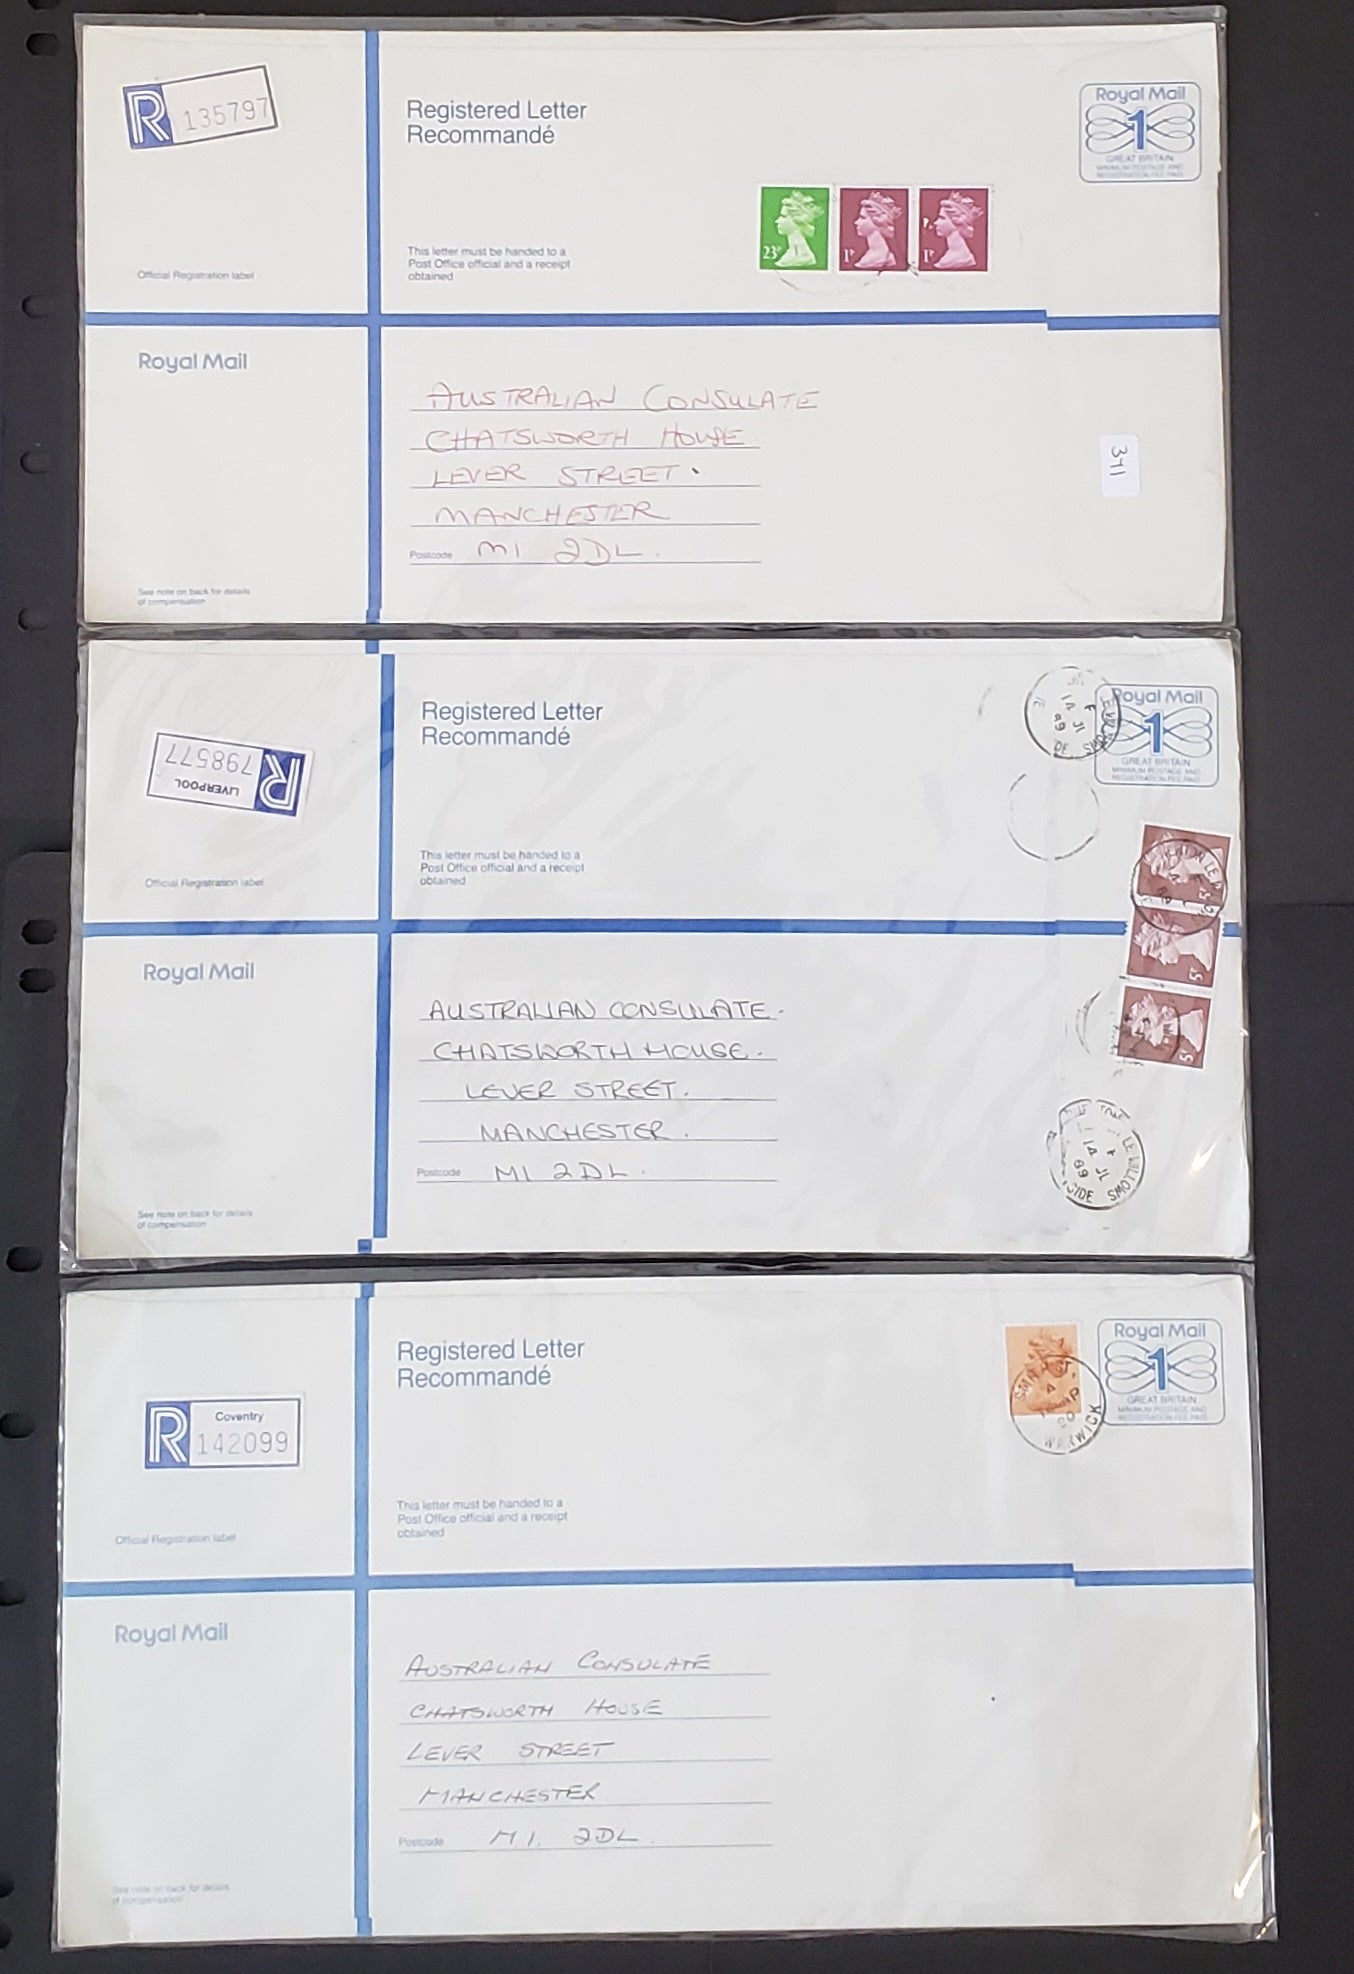 Lot 341 Great Britain 1989-1990 Decimal Machin Covers, A Selection of 5 Different Large Format Registered Envelopes, All Uprated With Values From 1p to 23p, All Sent Locally, All Frankings Are Different in Some way, Net. Est. $5.